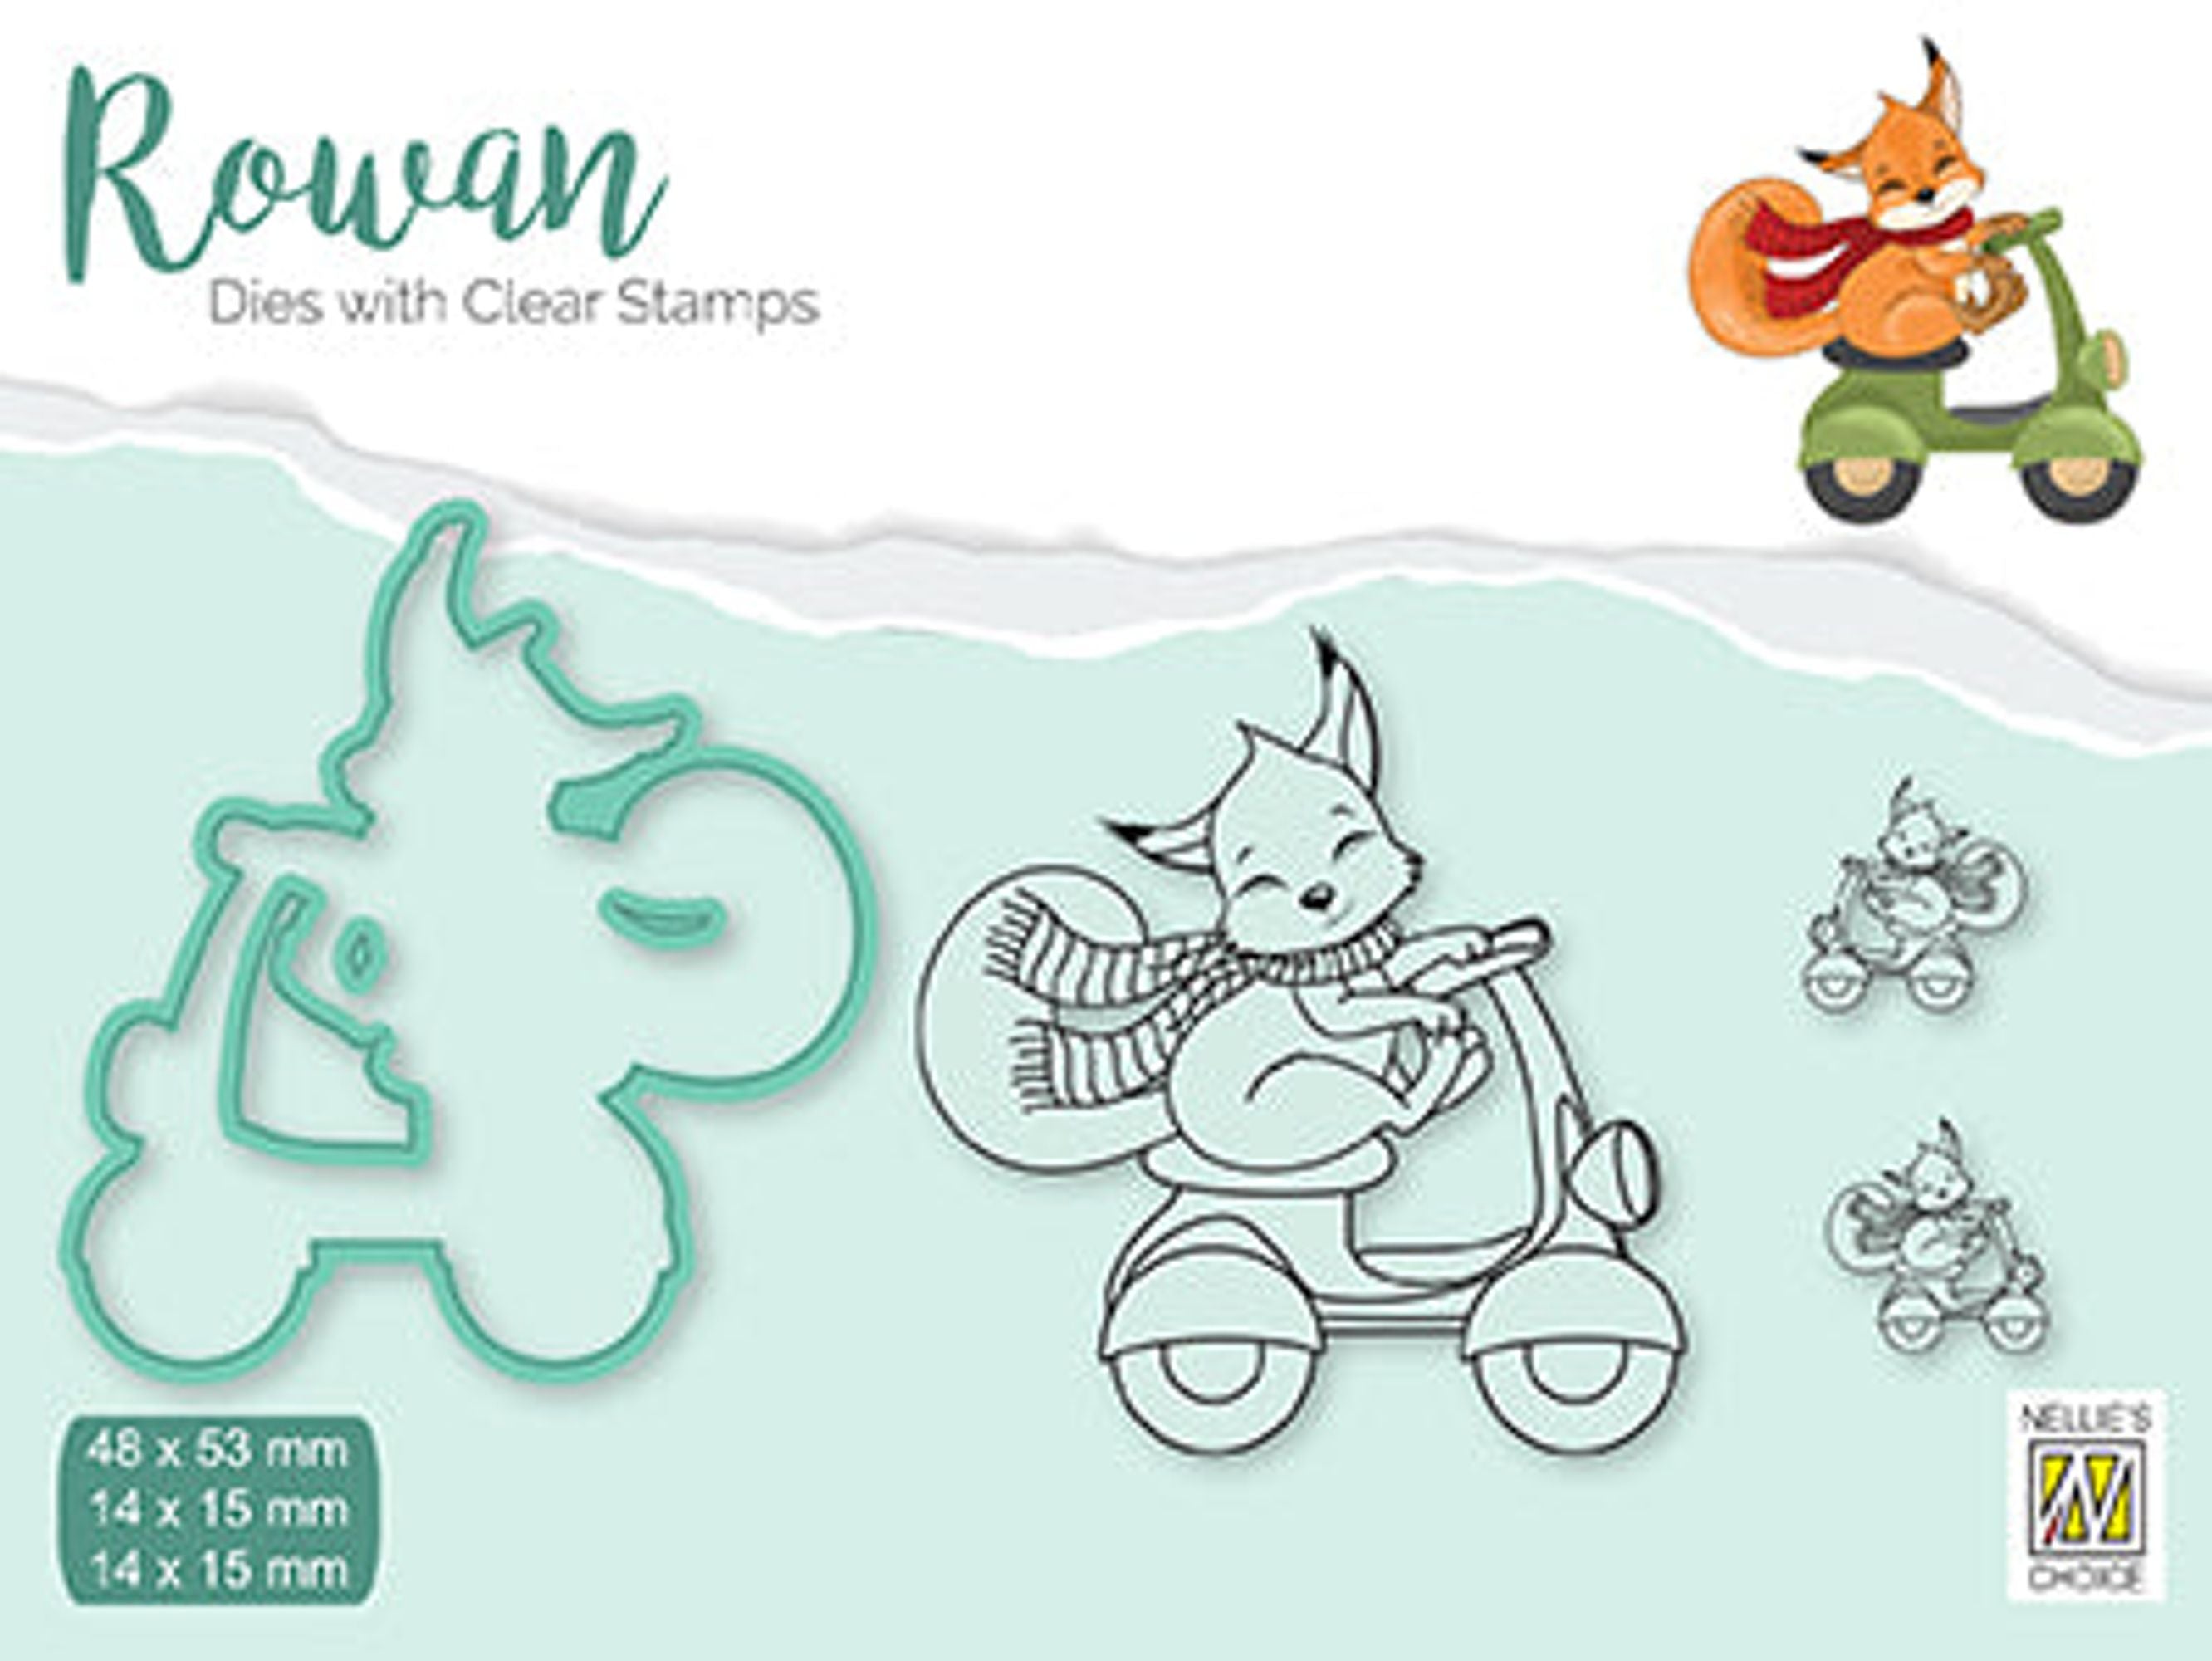 Rowan Dies with Clear Stamps Christmas Fox